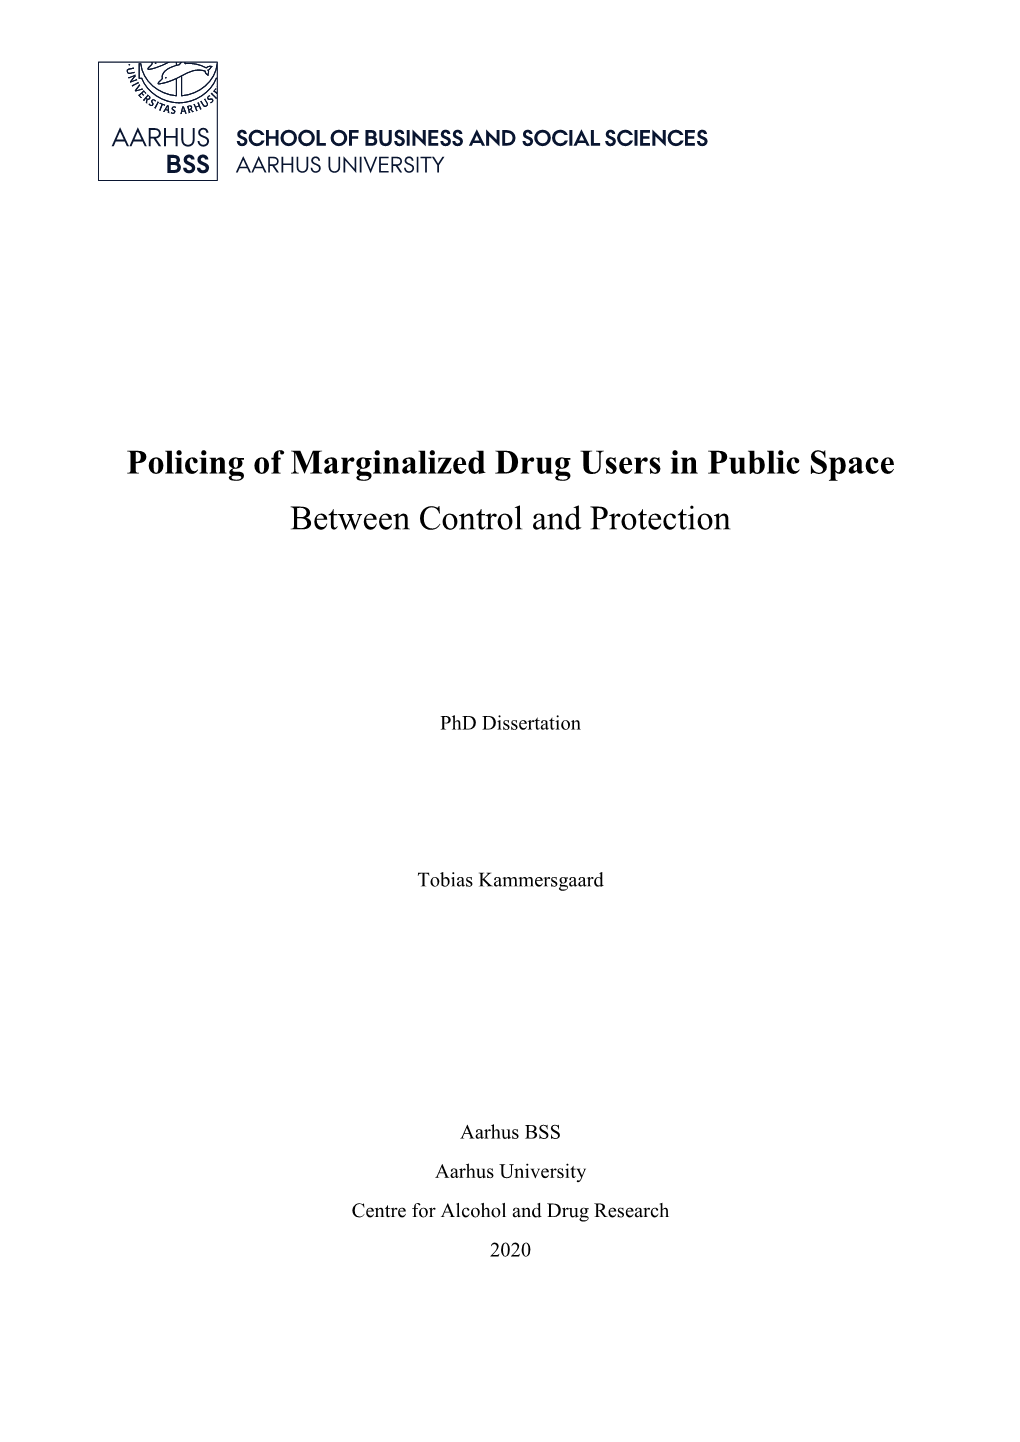 Policing of Marginalized Drug Users in Public Space Between Control and Protection